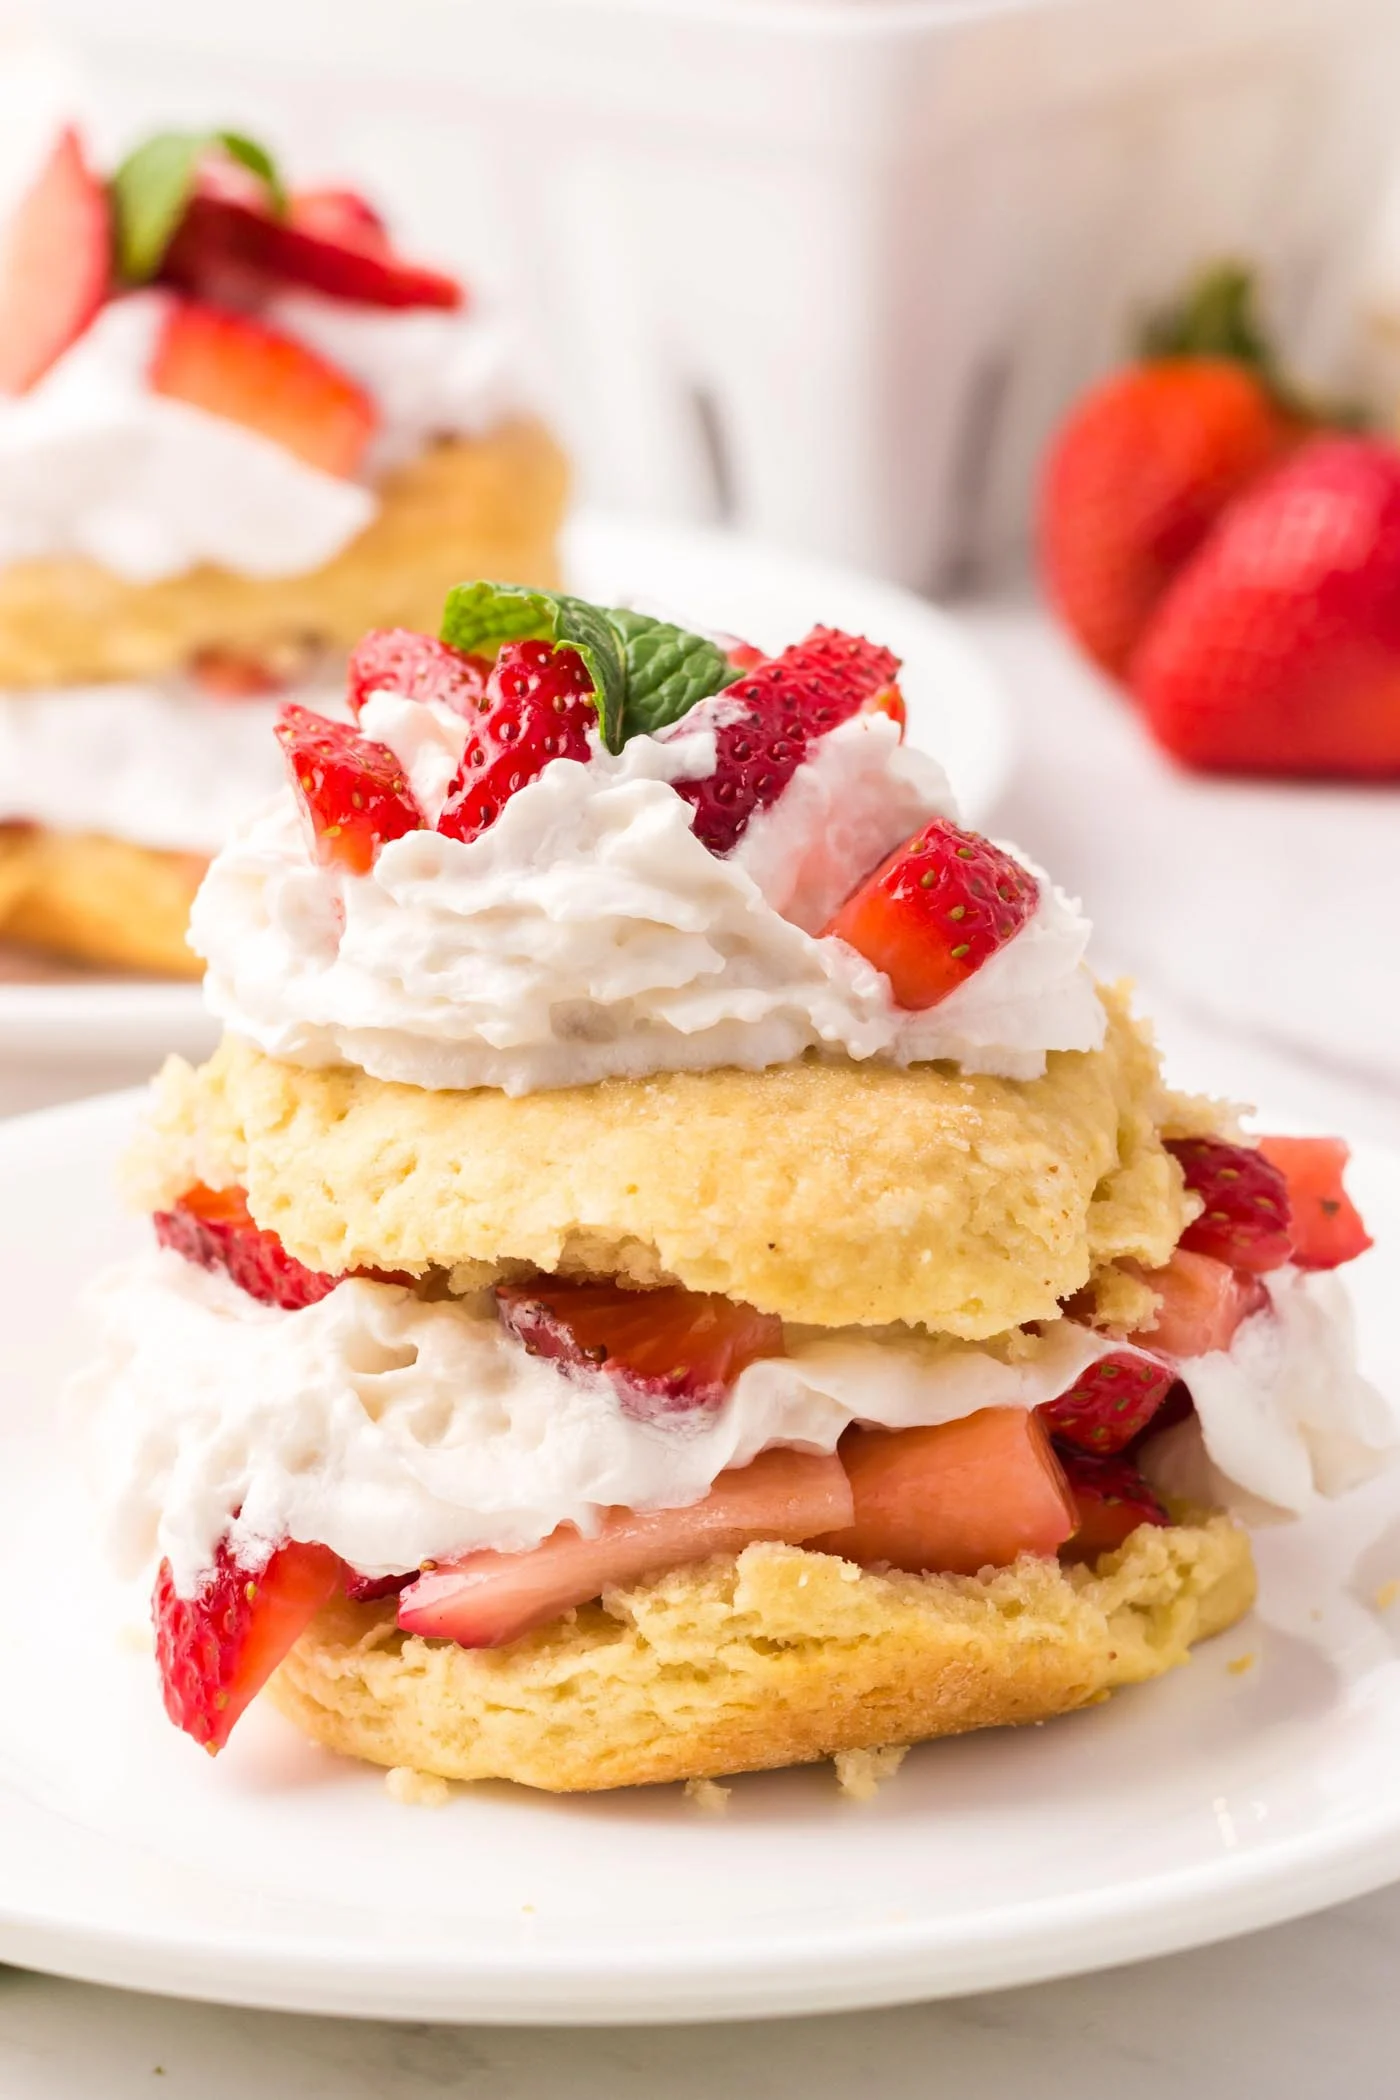 Side view of fluffy vegan strawberry shortcake filled with strawberries and cream